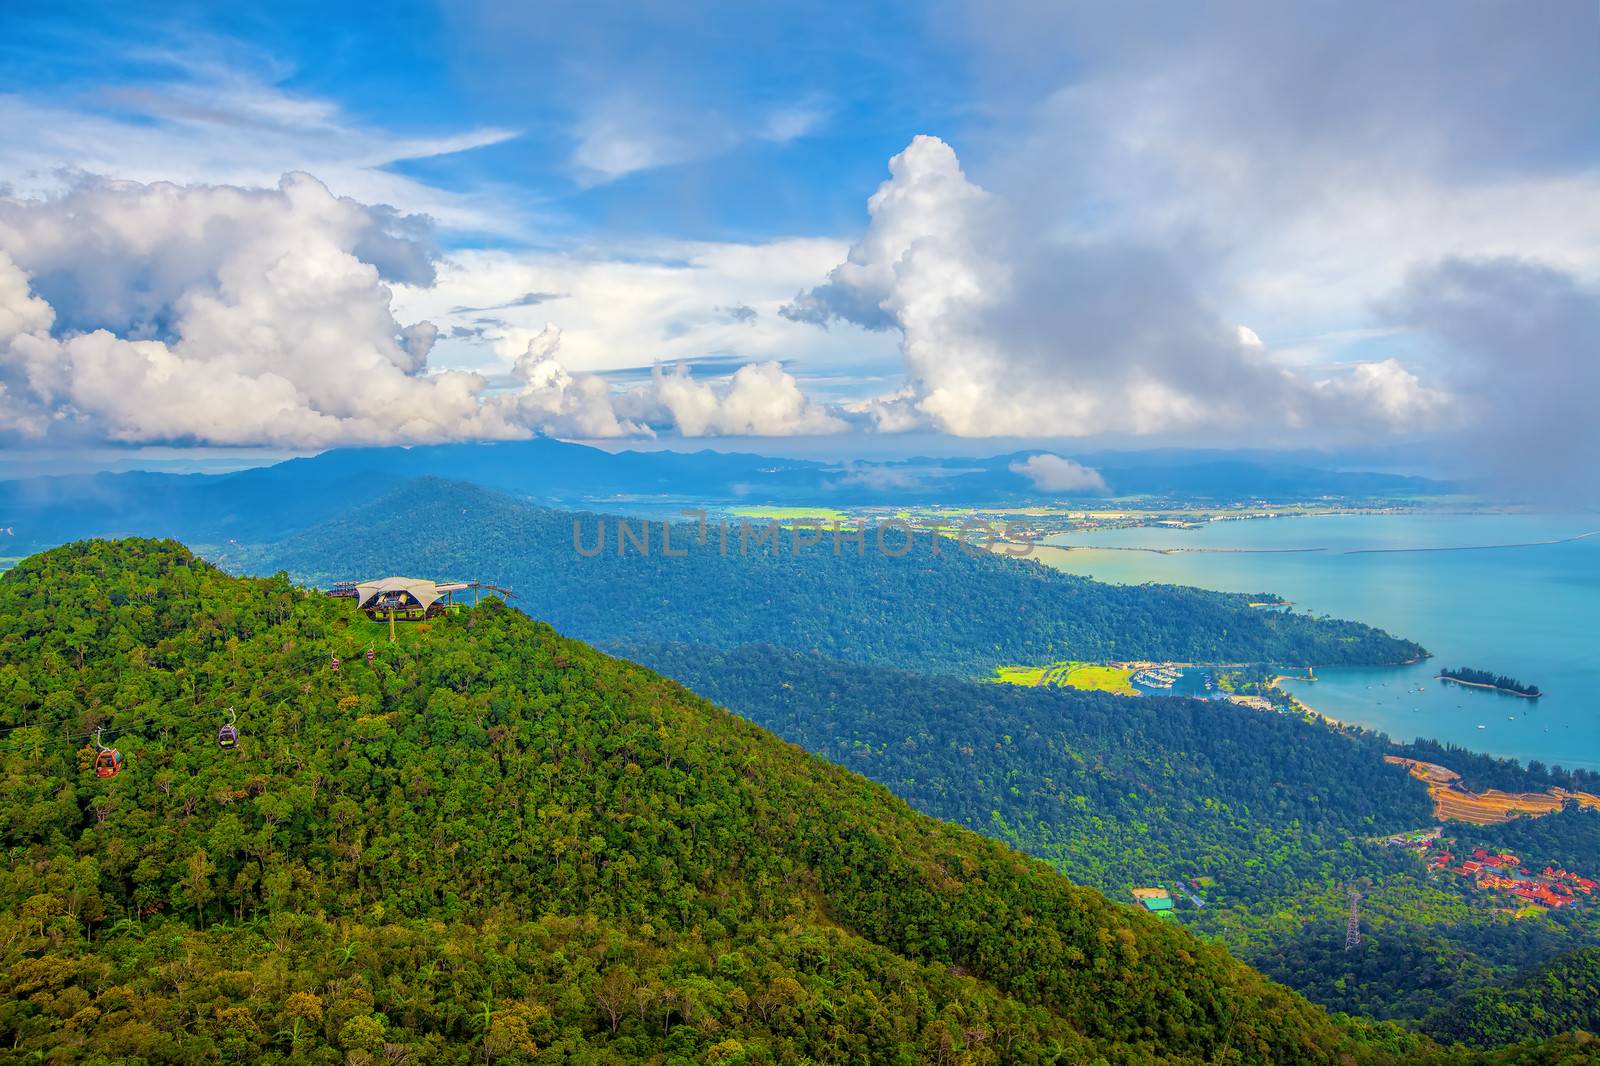 The landscape of Langkawi seen from Cable Car viewpoint